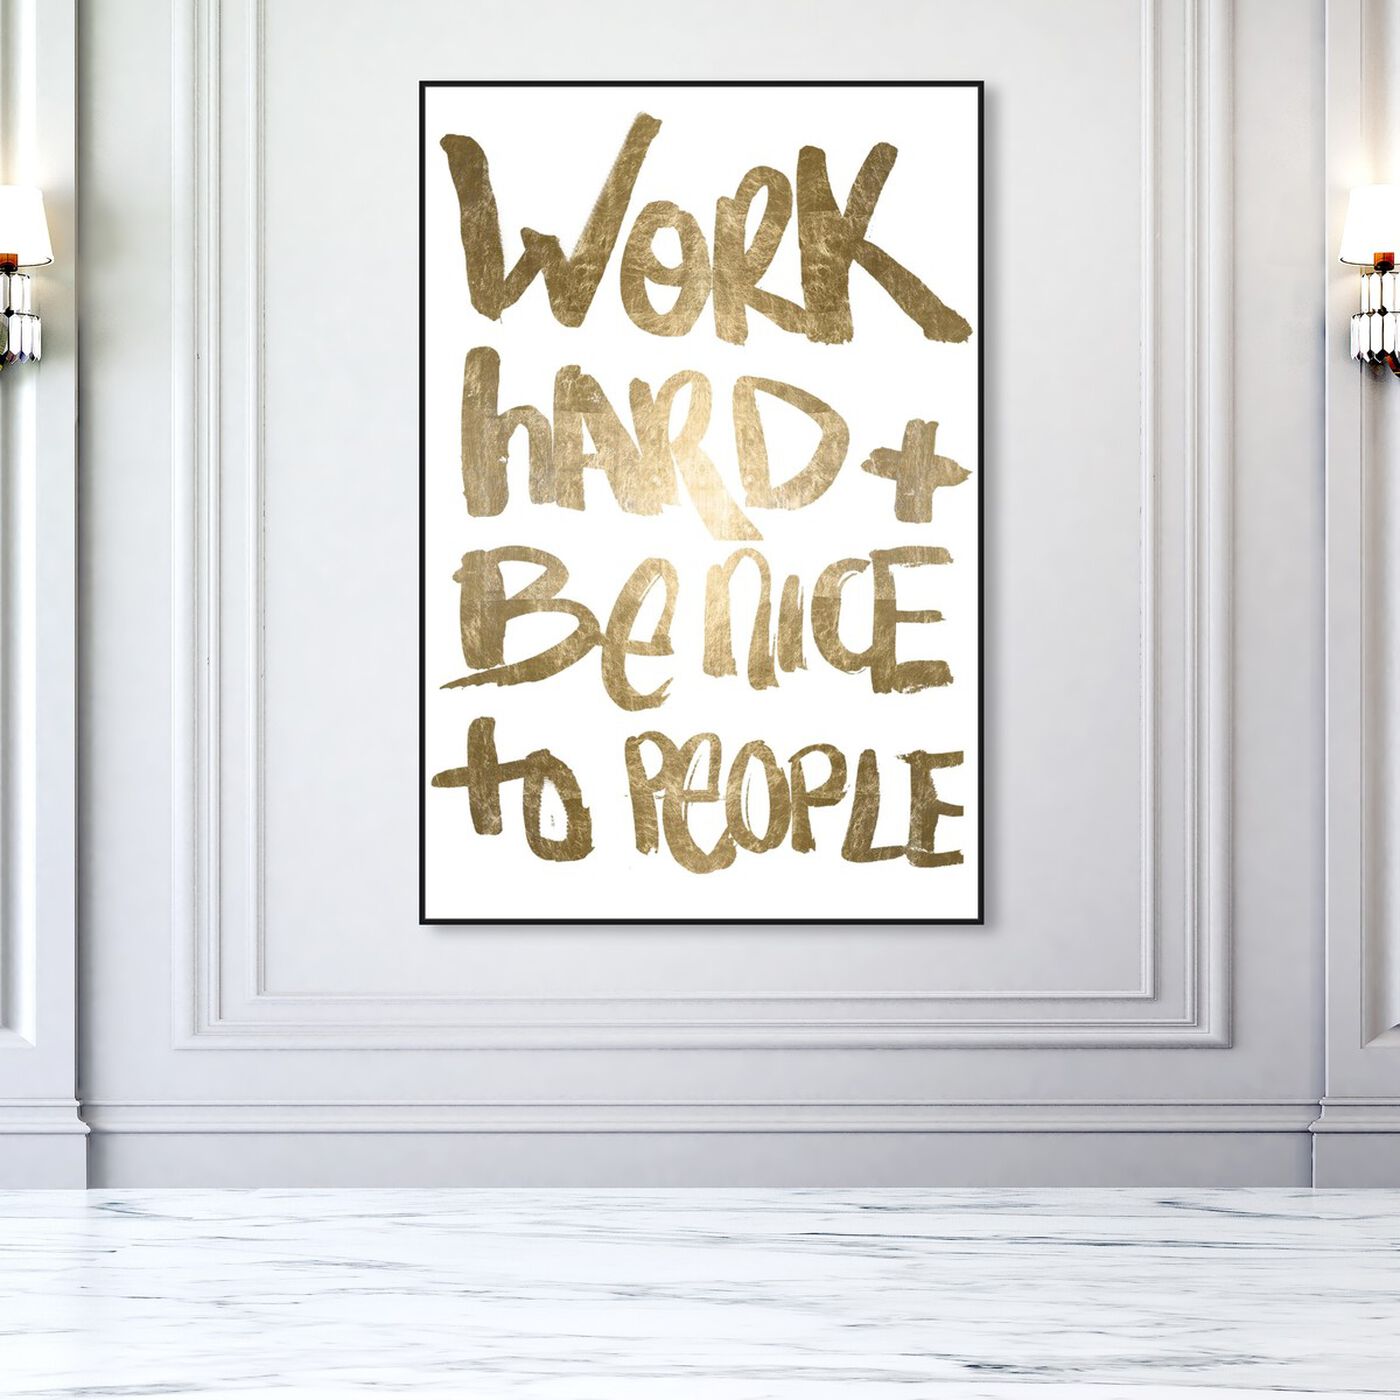 Hanging view of Work and Be Nice featuring success and entrepreneurial and work motivation art.